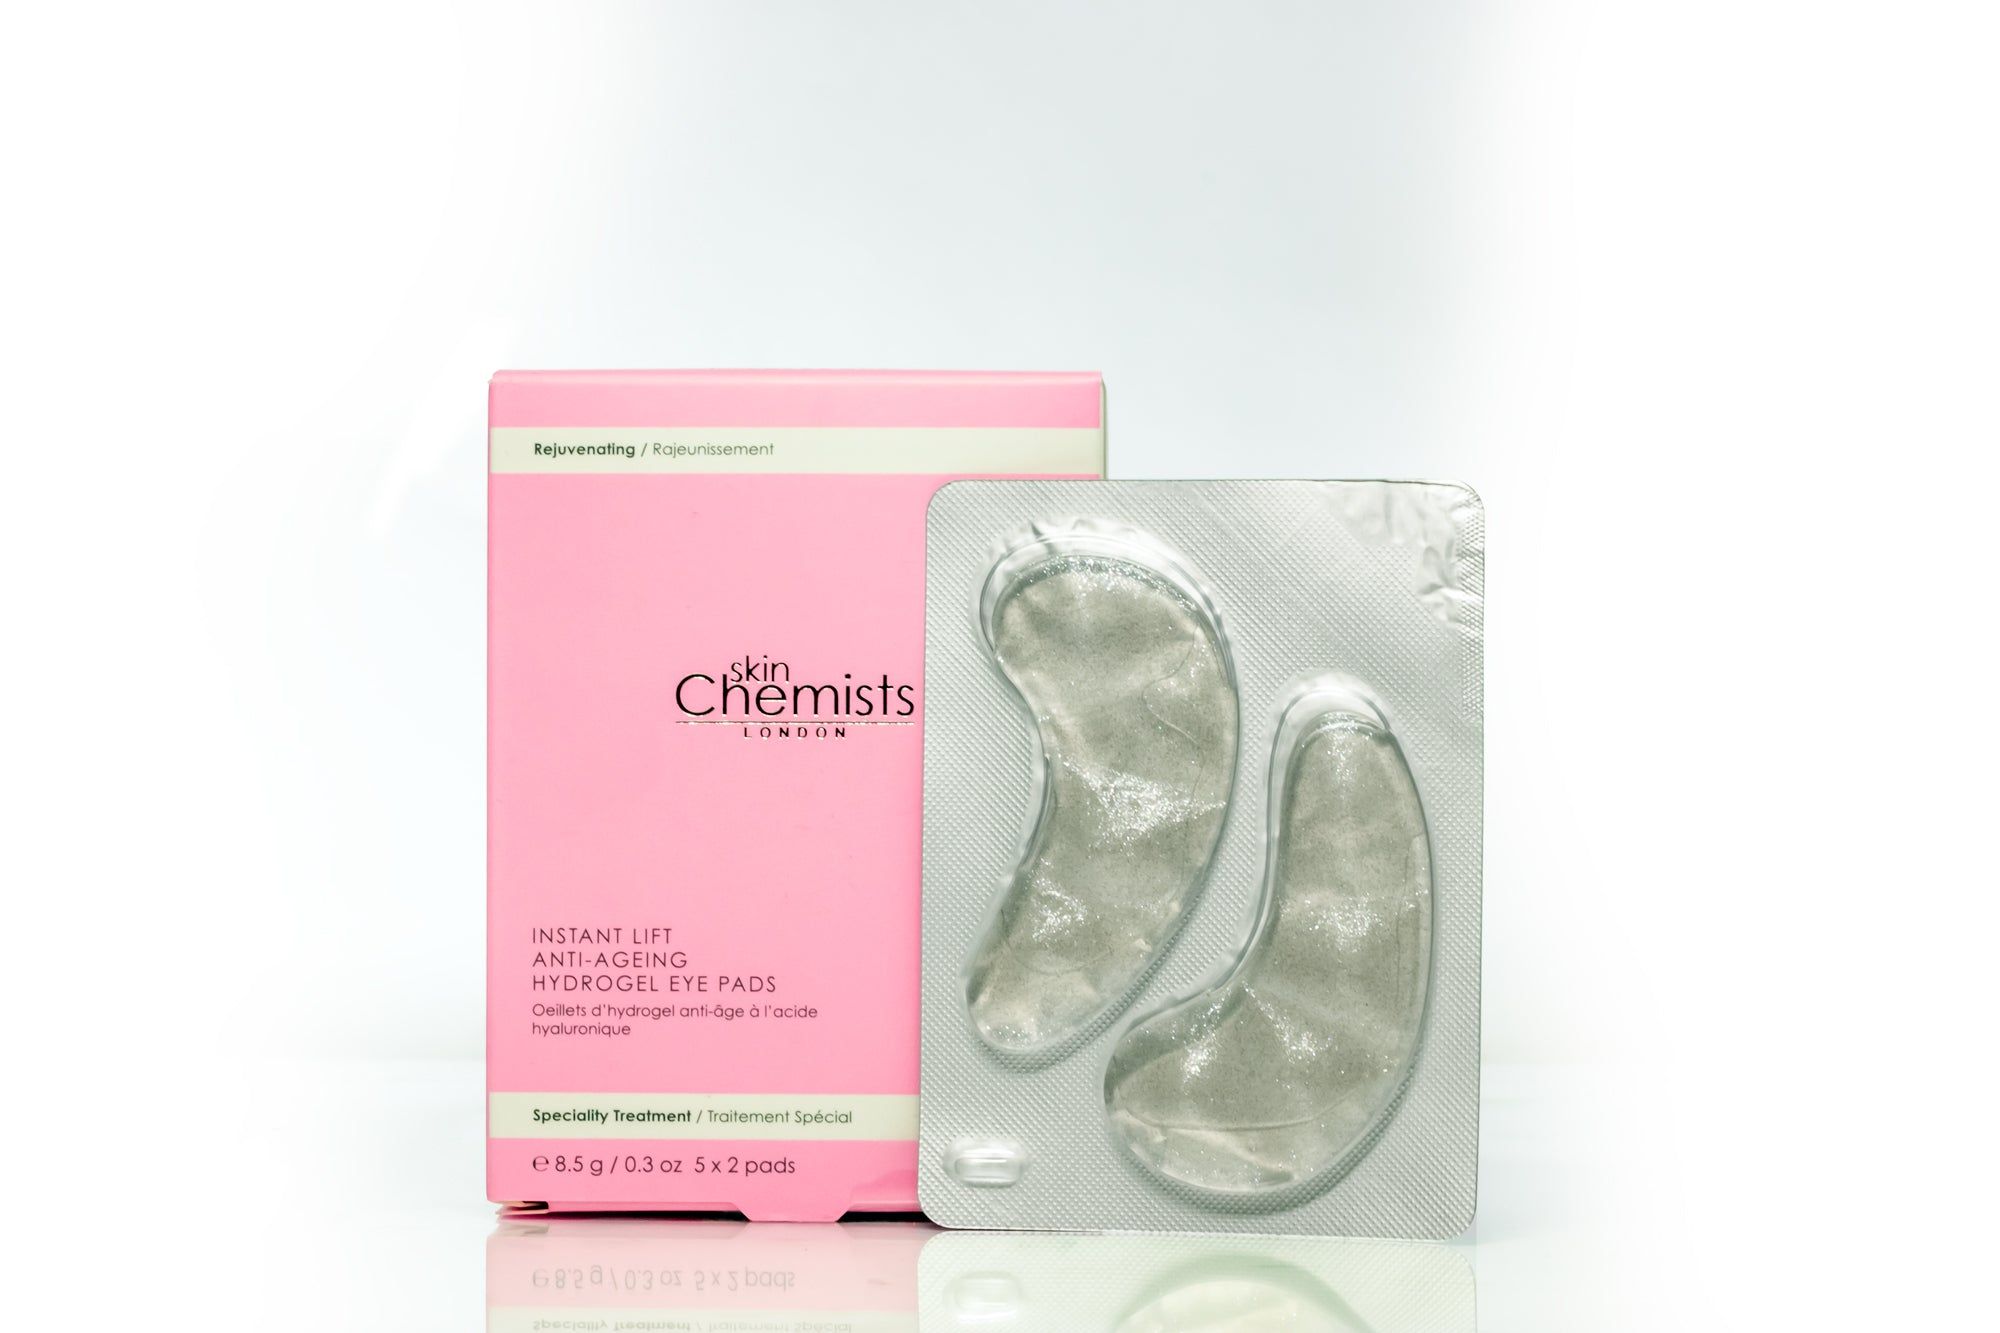 skinChemists Instant Lift Anti-Ageing Hydrogel Augenpads.